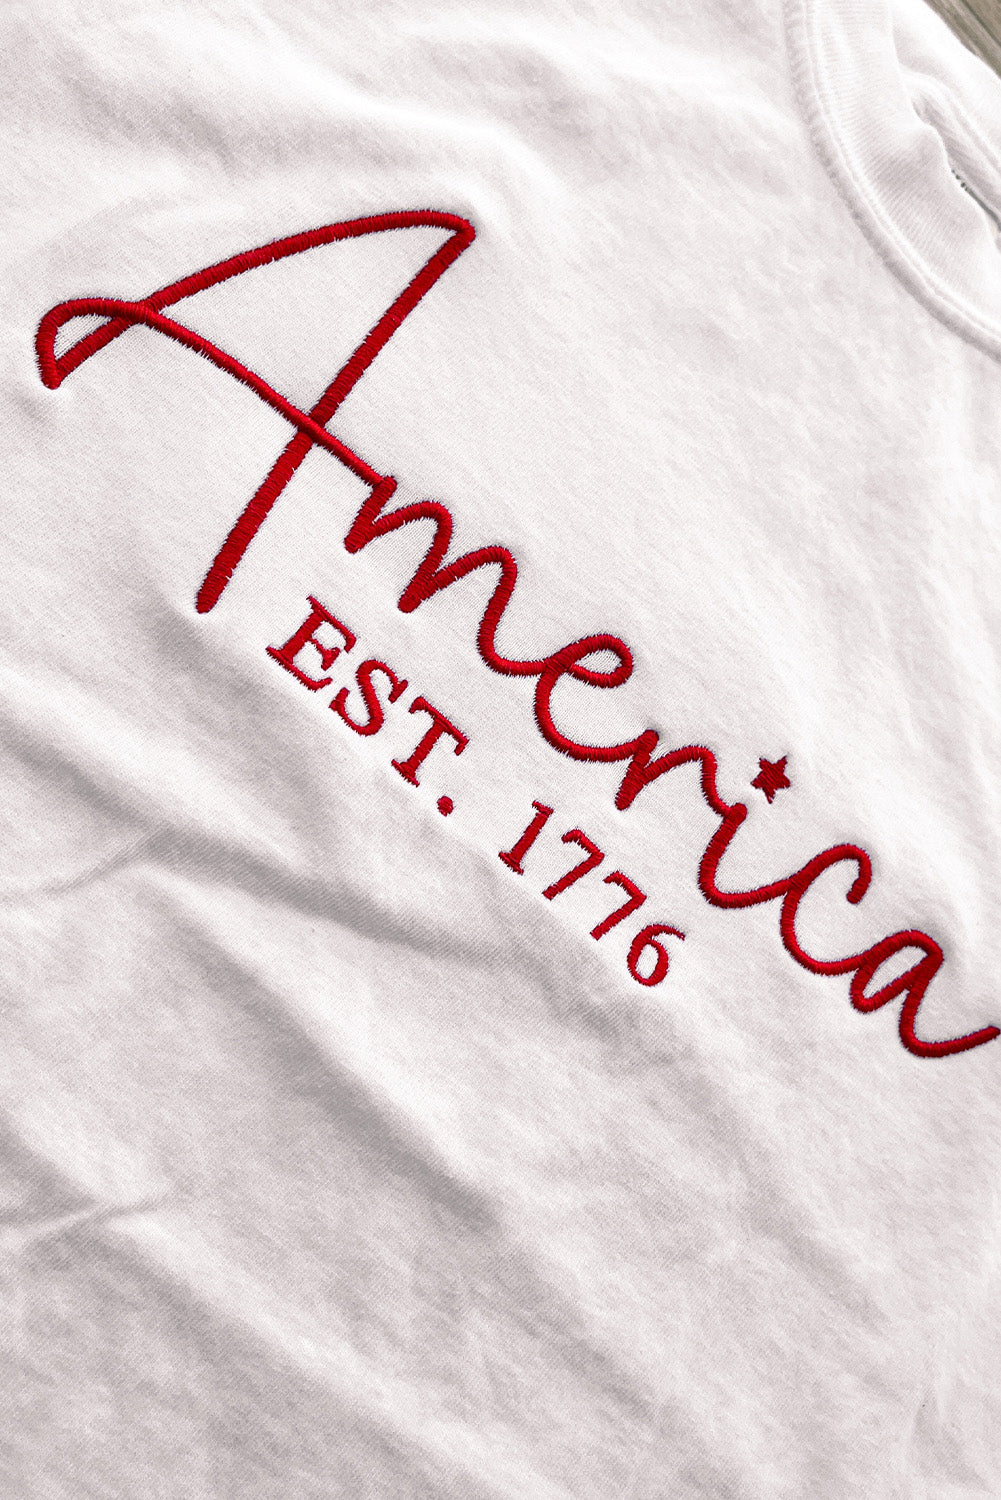 White America EST.1776 Embroidered Graphic Tee Graphic Tees JT's Designer Fashion